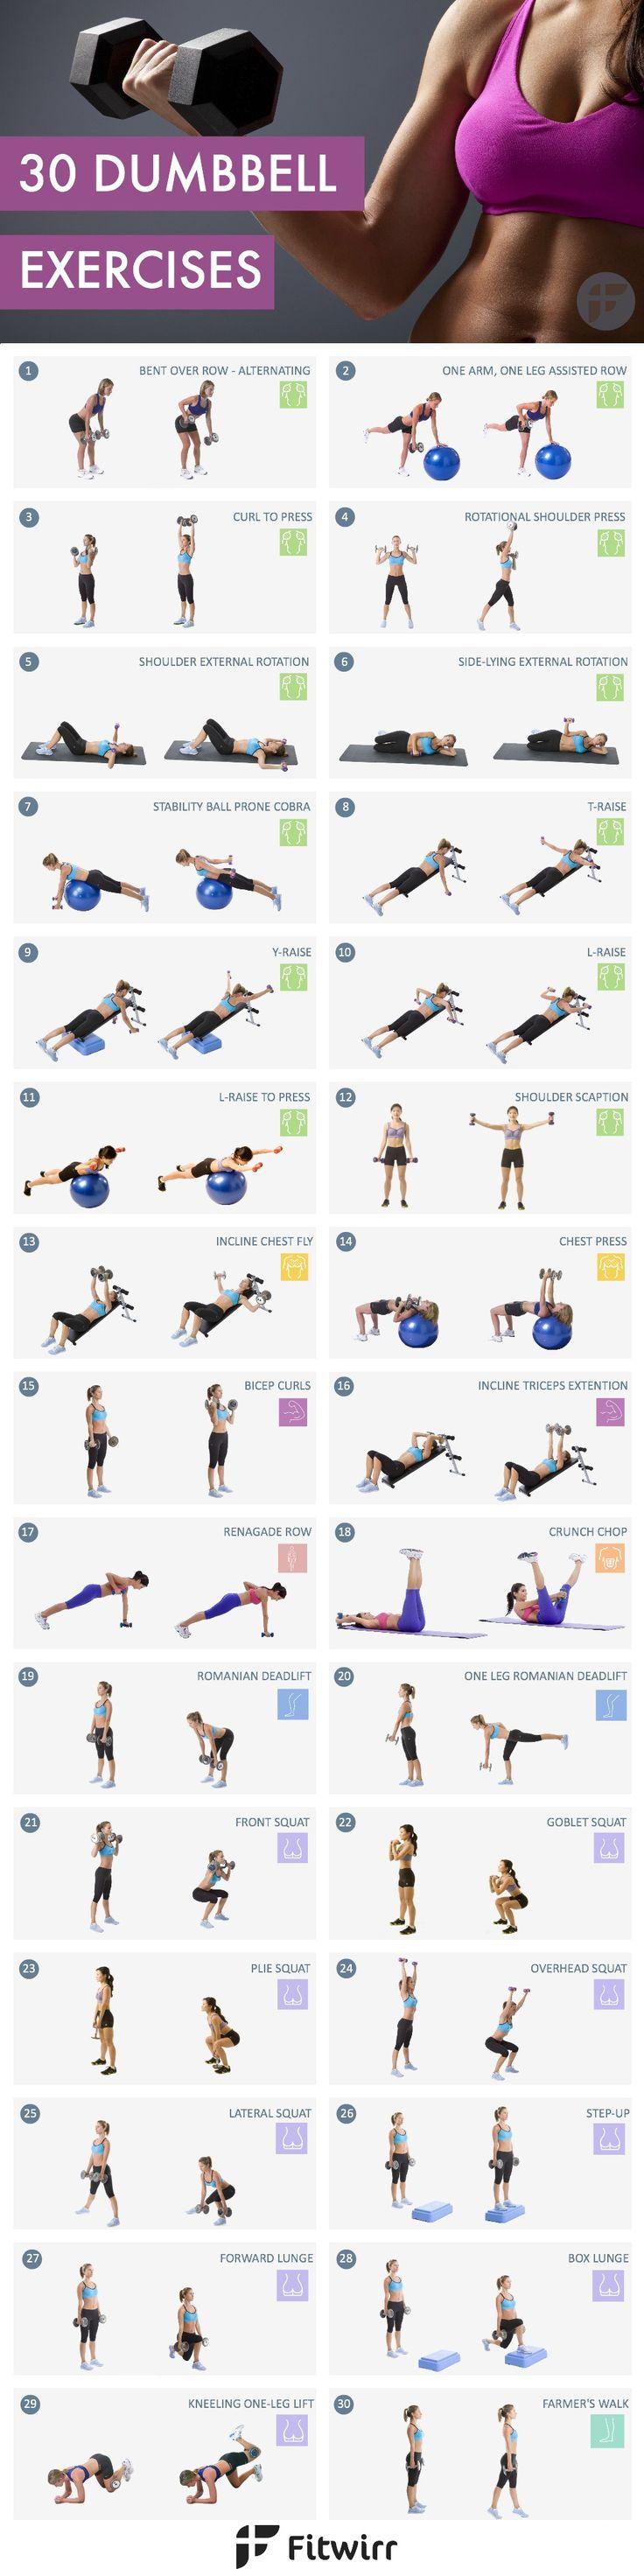 Hochzeit - Home Workouts: 30 Dumbbell Exercises For Women [Image List]